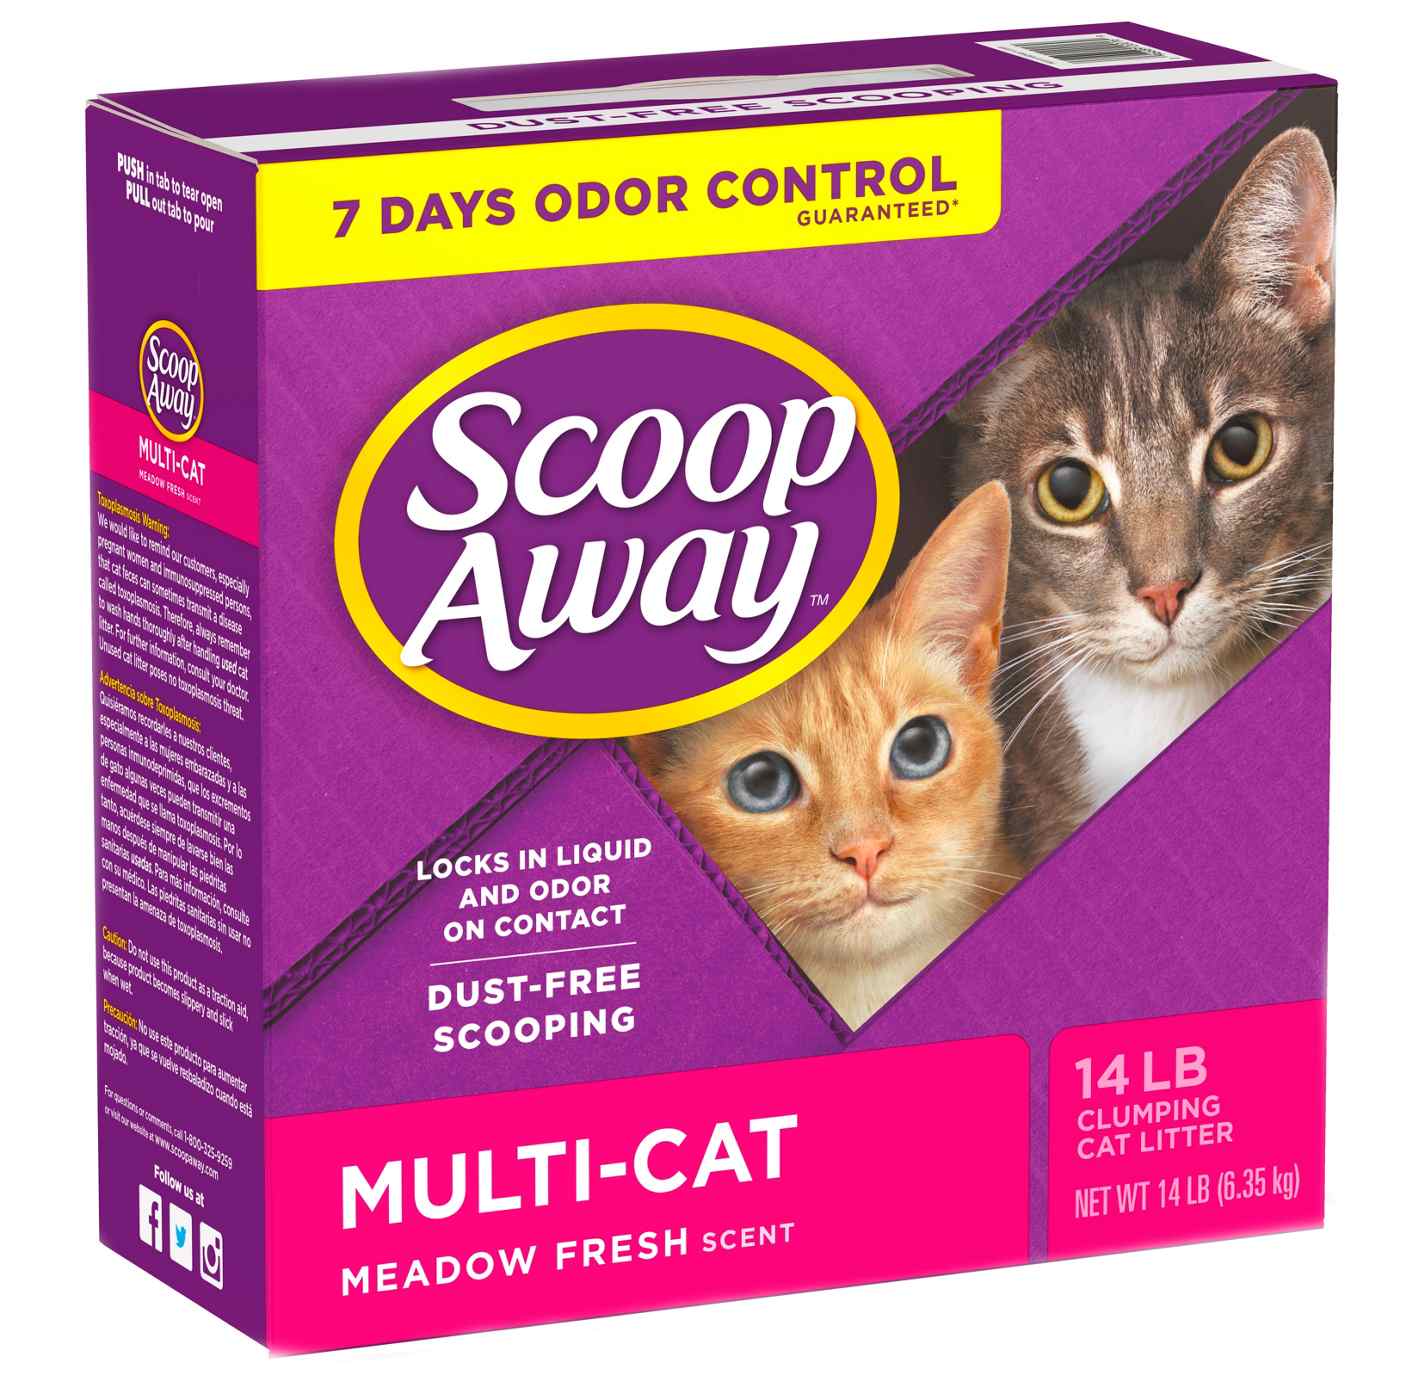 Scoop Away Multi-Cat Clumping Cat Litter, Meadow Fresh Scent; image 1 of 7